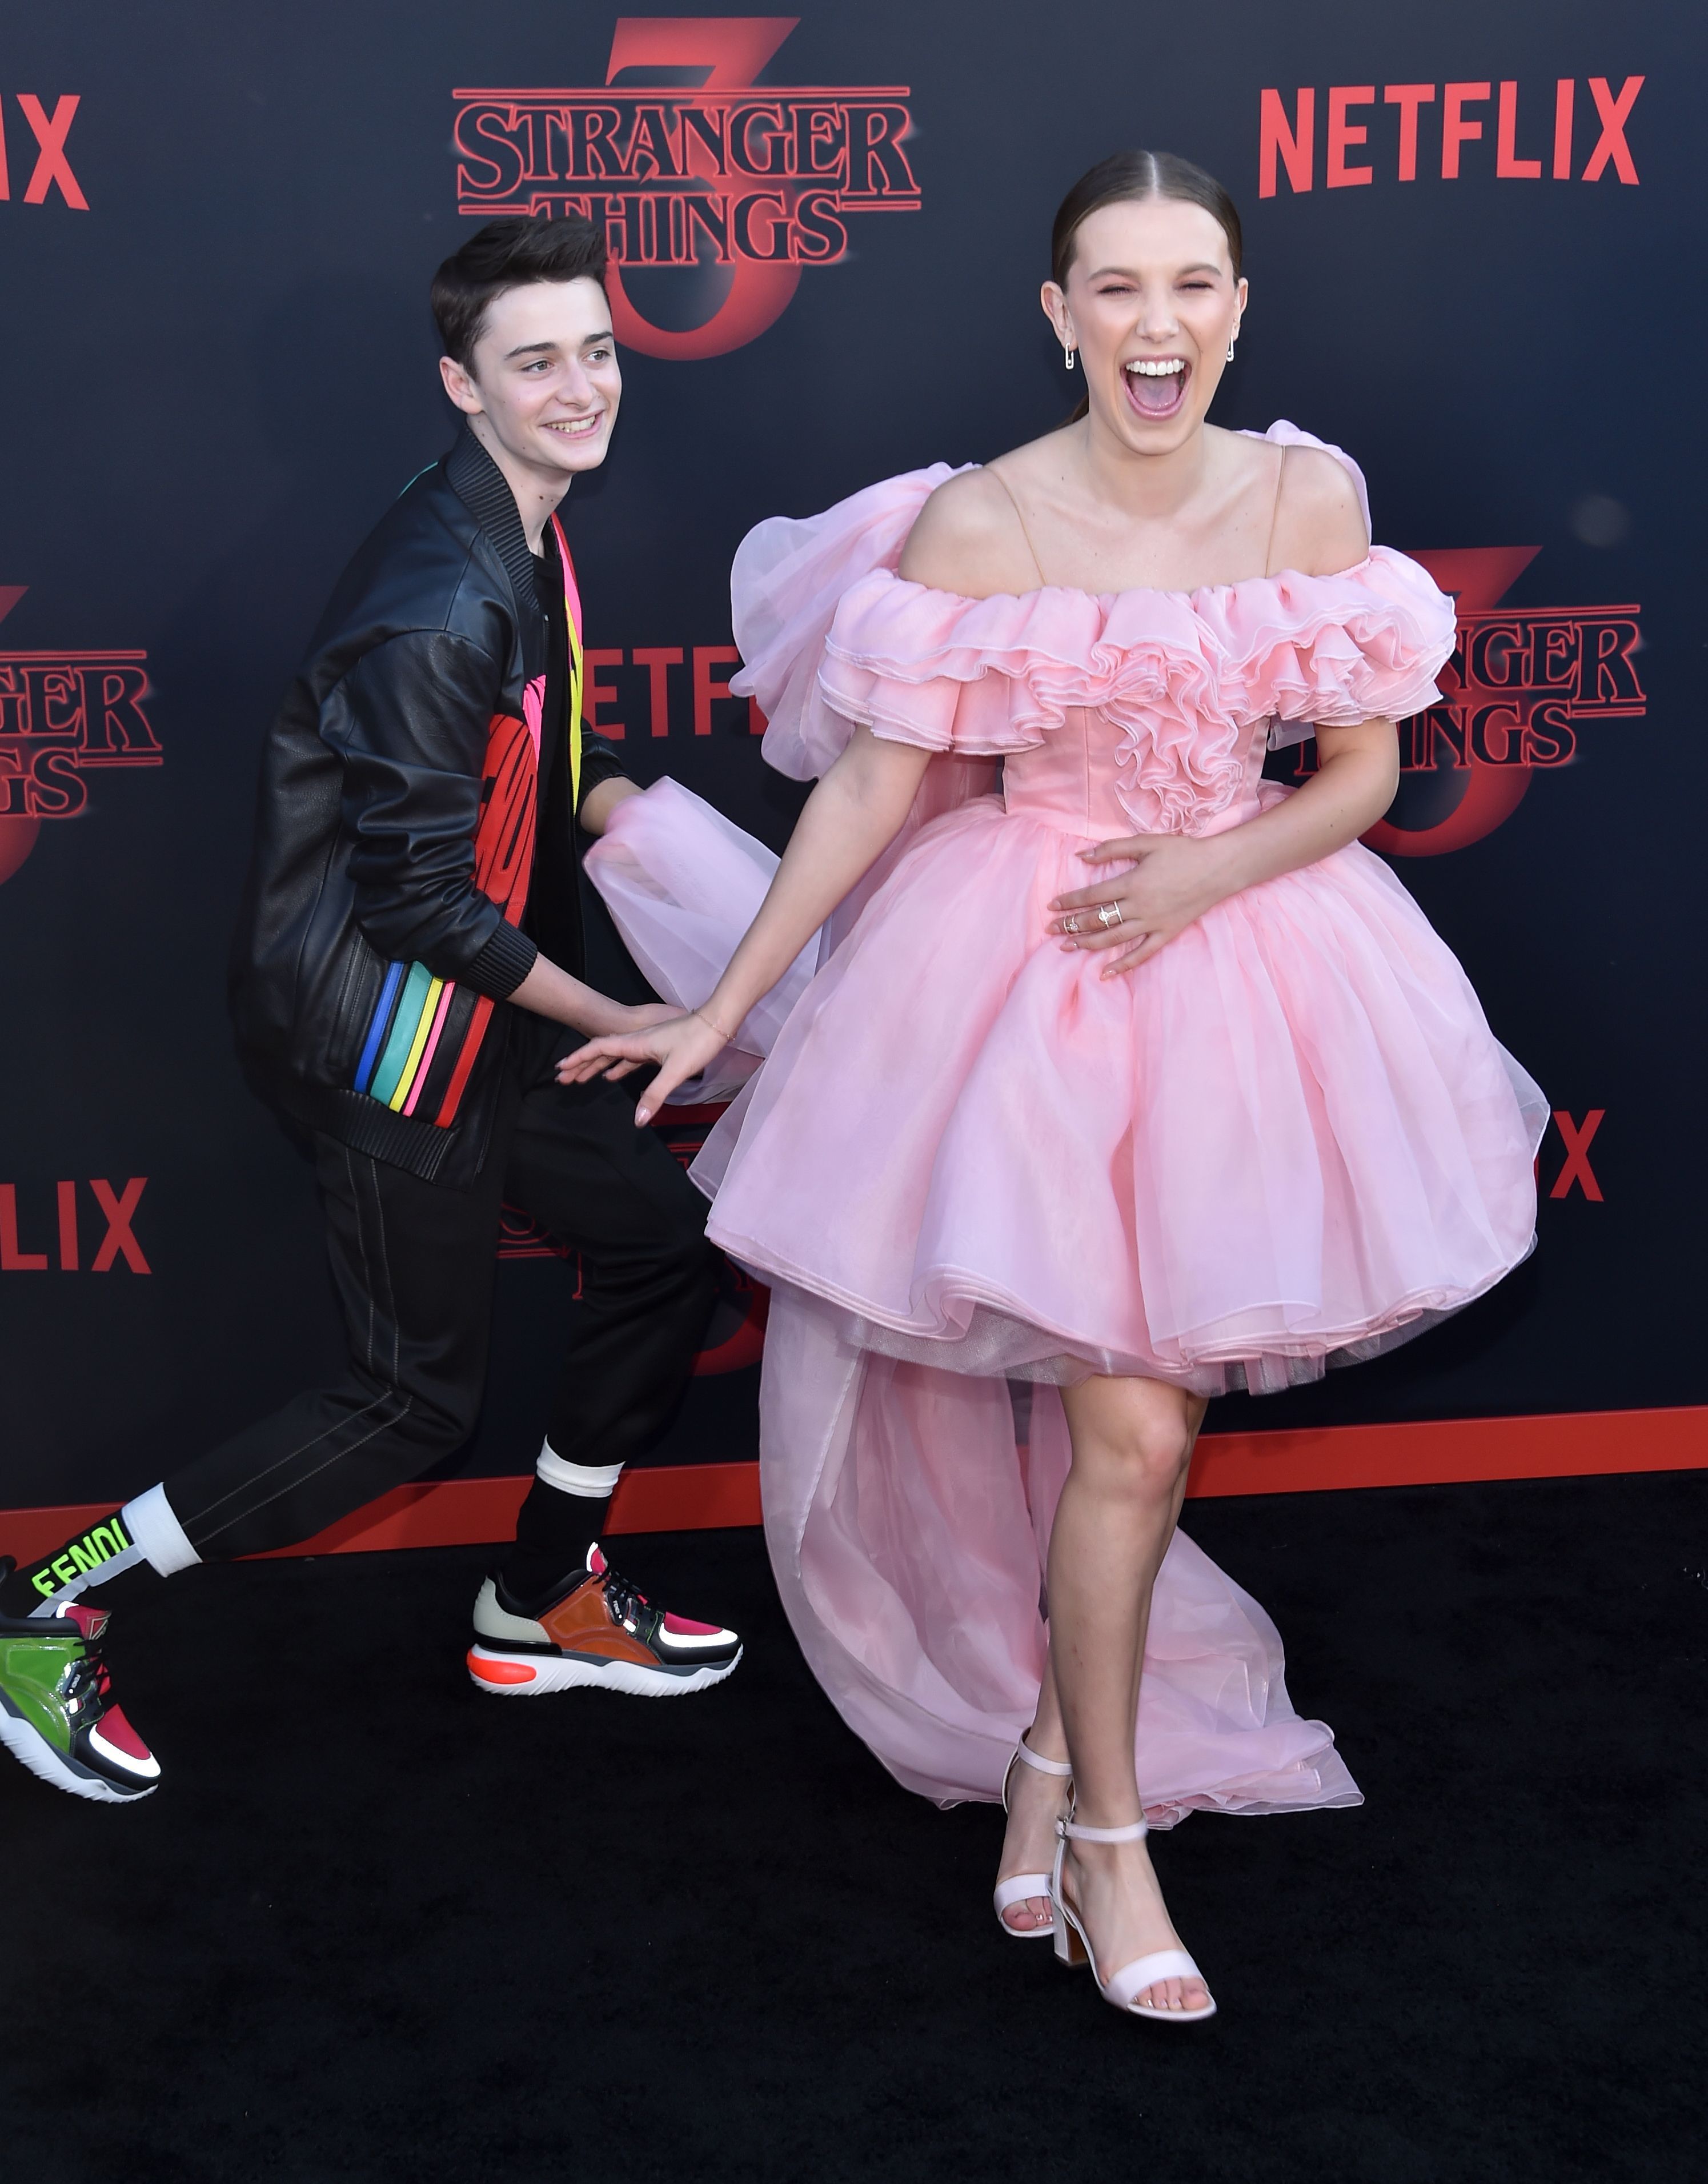 Netflix Geeked on X: Millie Bobby Brown's red carpet outfit is an 11/10  #StrangerThings4  / X